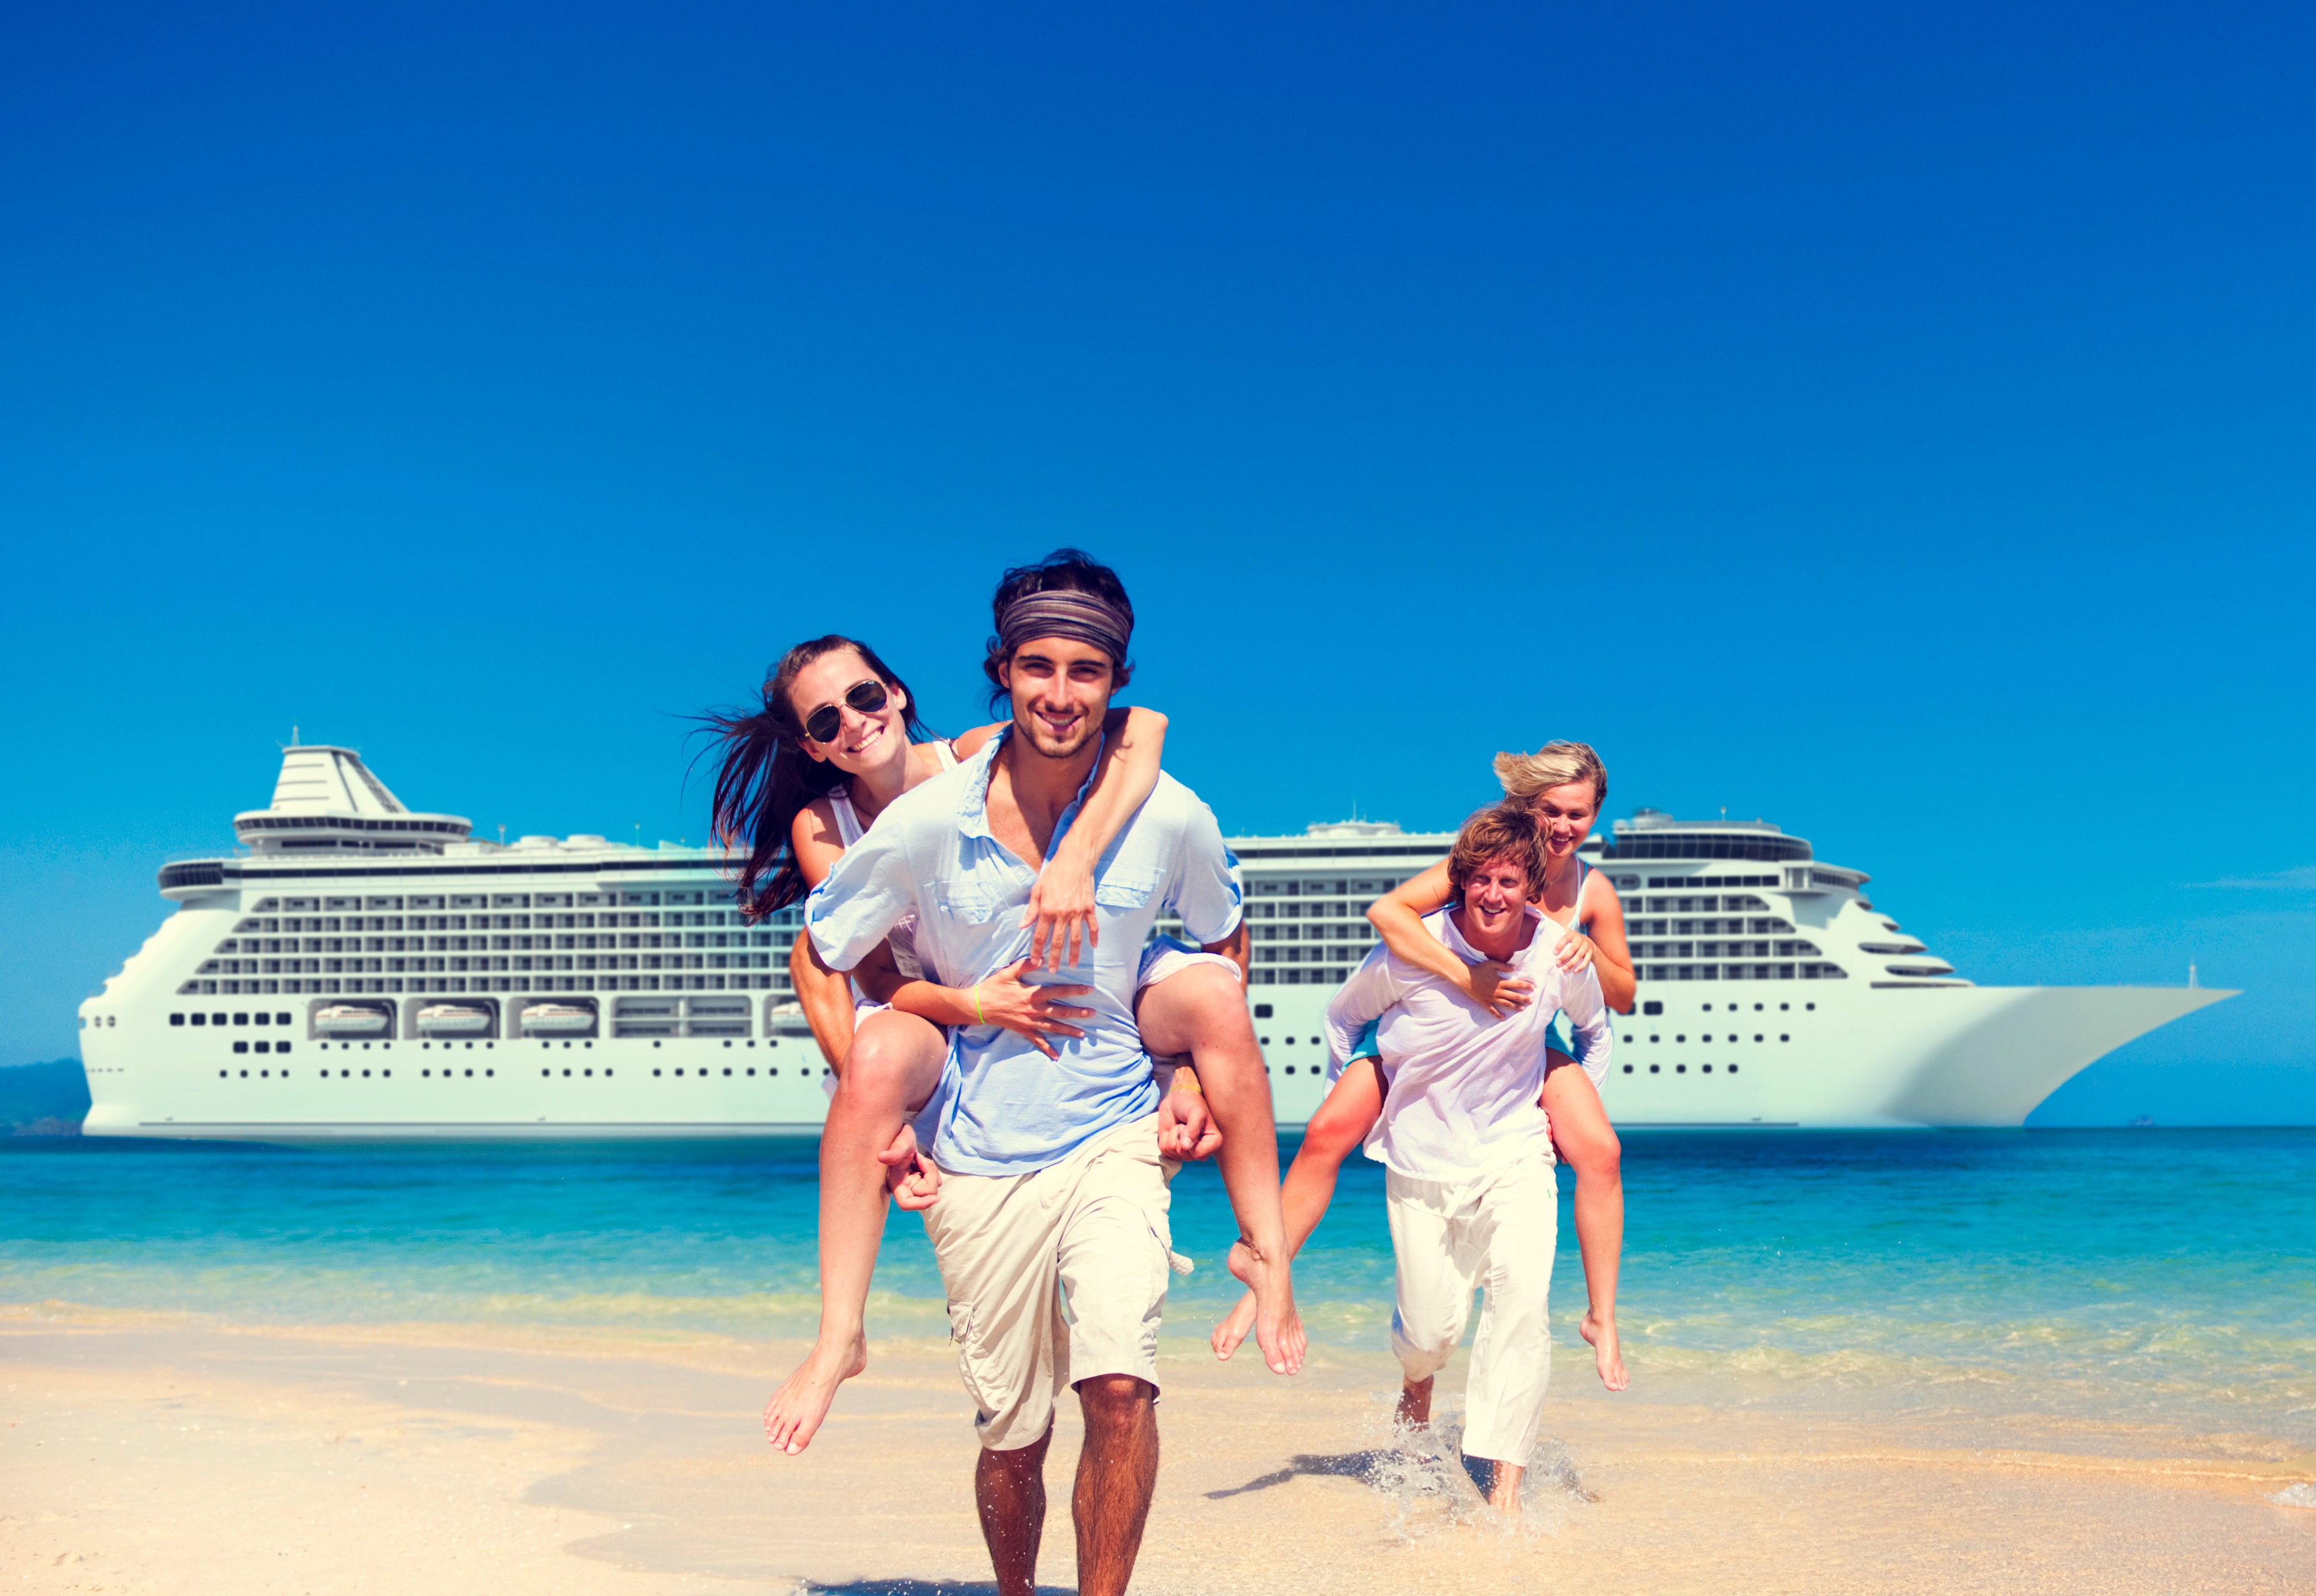 Two couples playing on the shoreline with a cruise ship behind them.